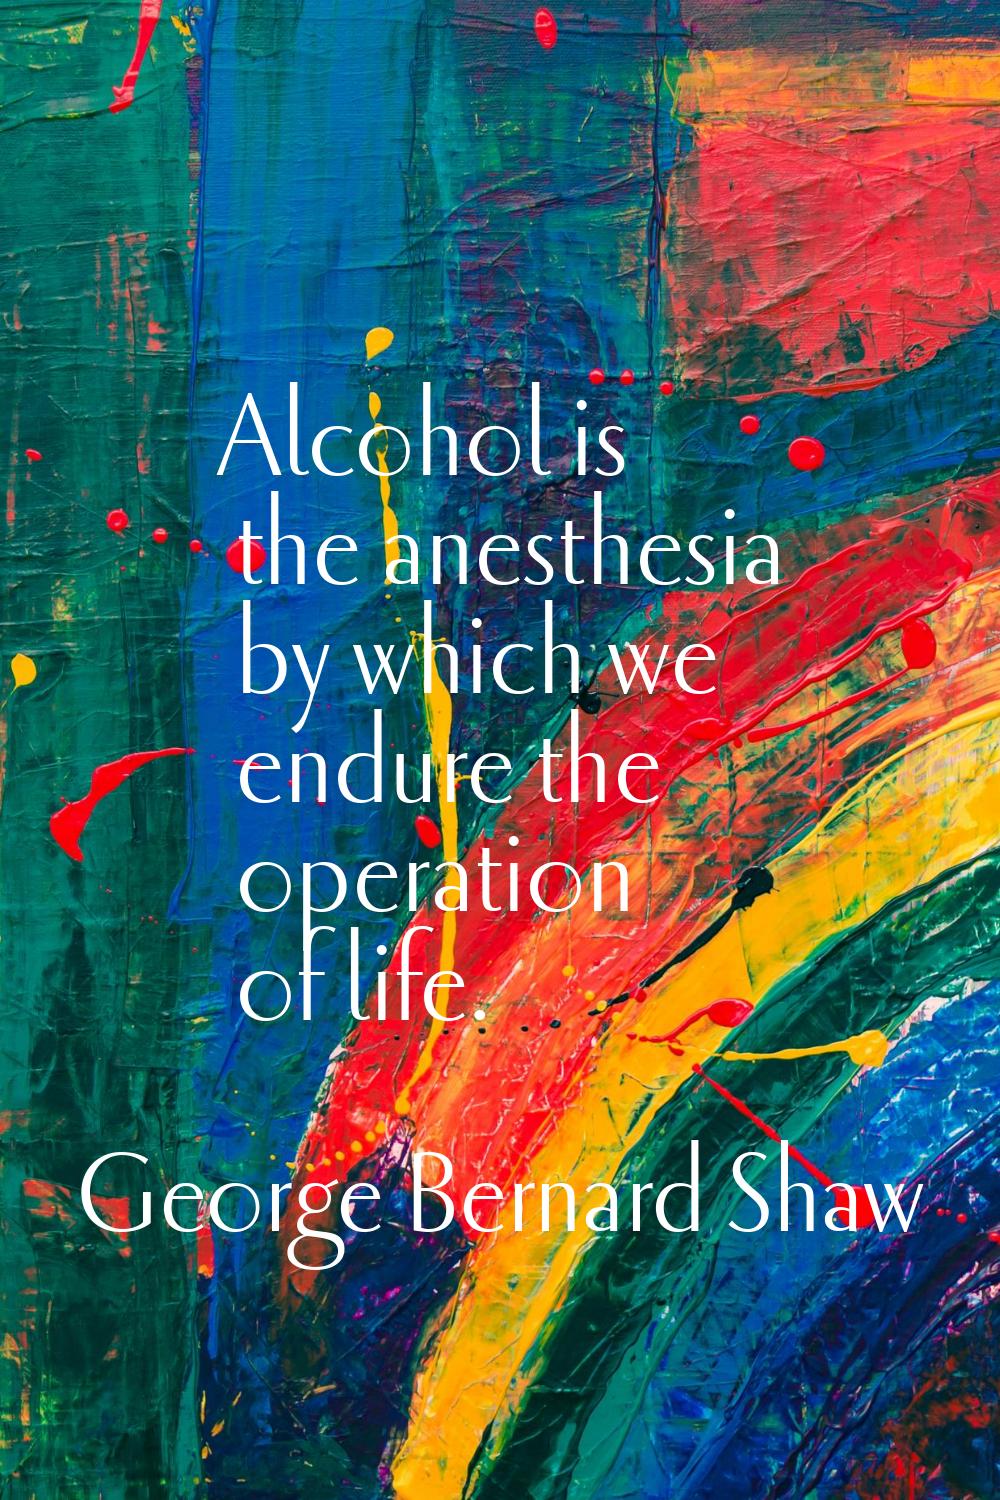 Alcohol is the anesthesia by which we endure the operation of life.